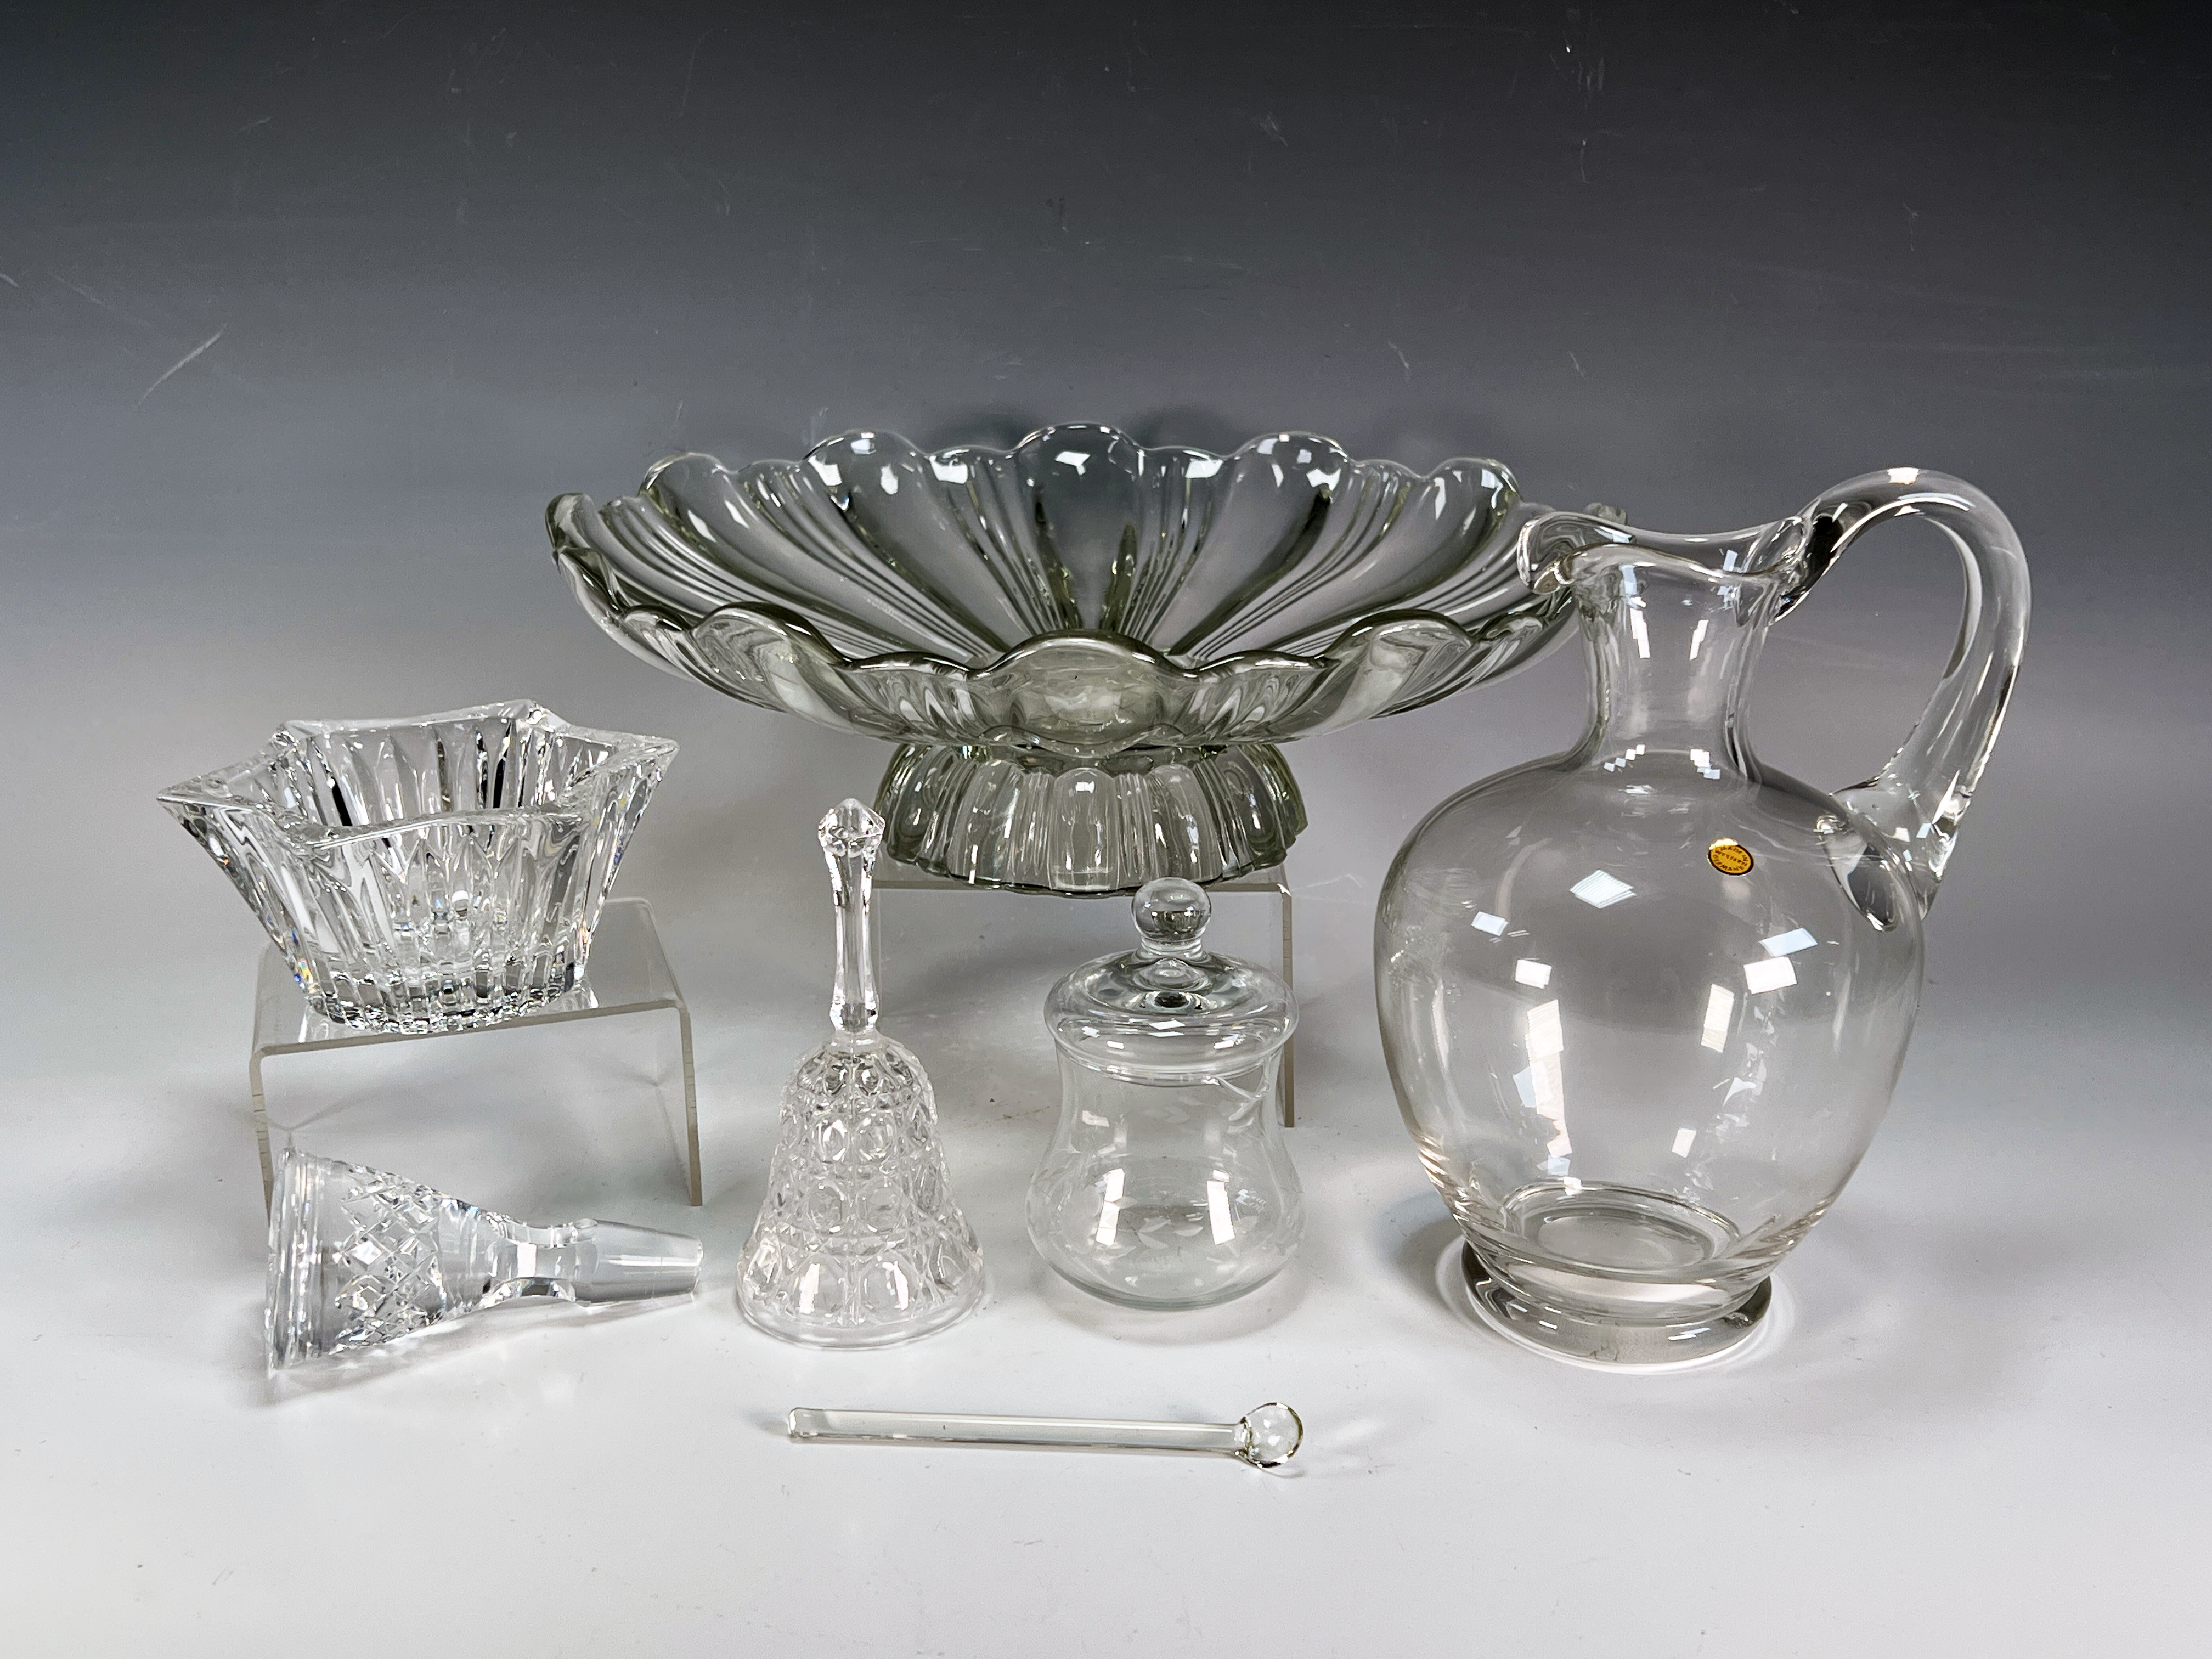 Glass & Crystal Serving Decorative Items image 1